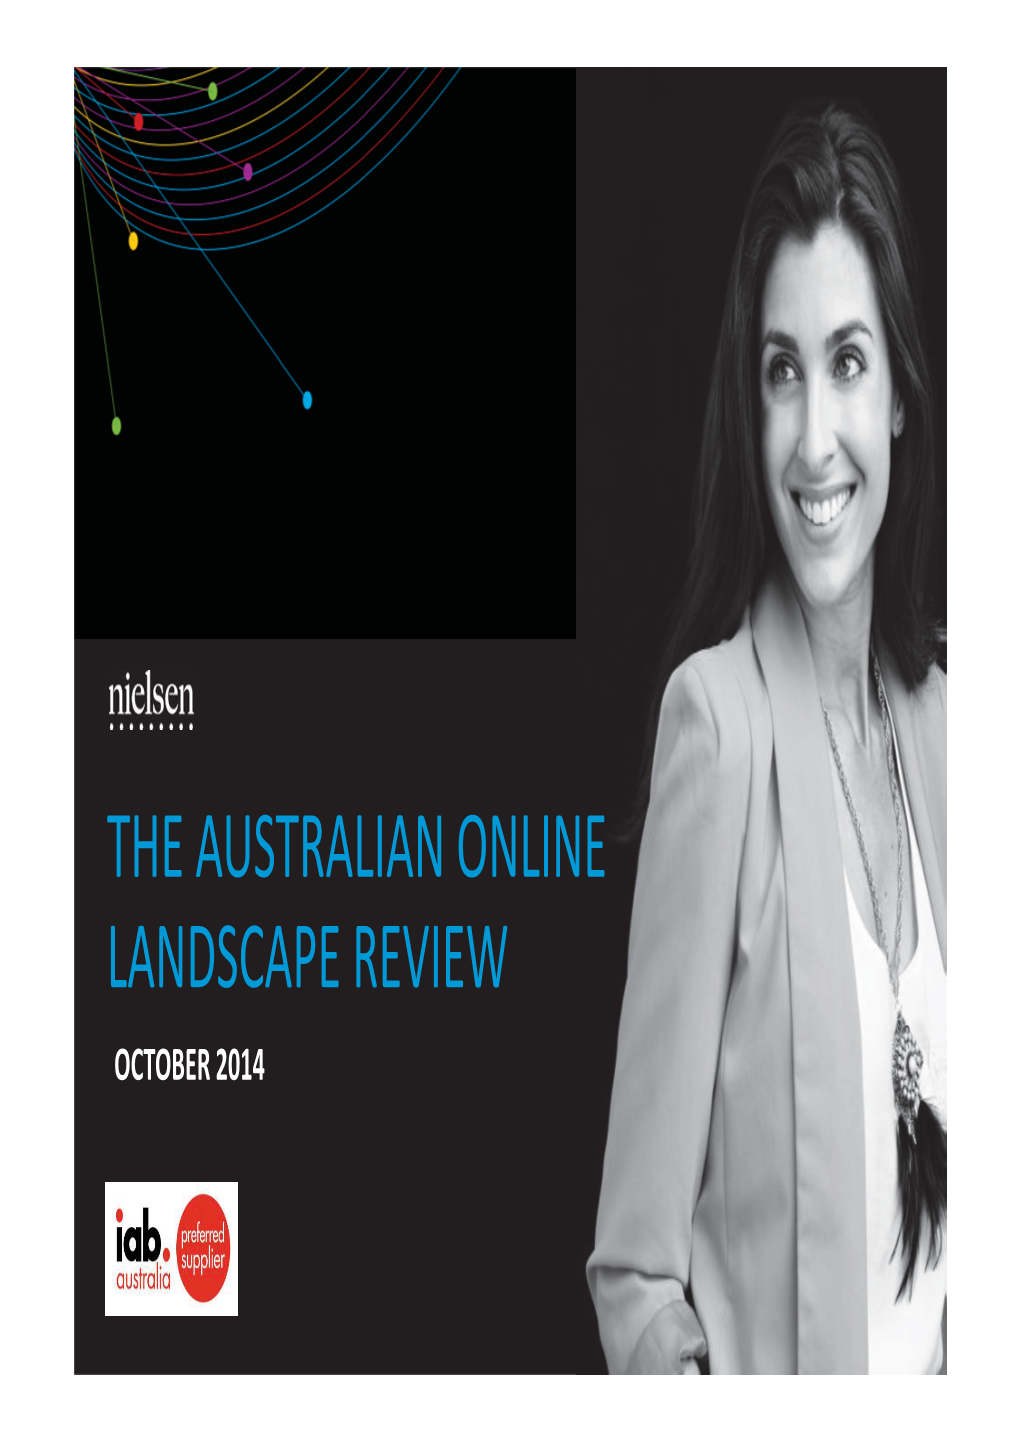 THE AUSTRALIAN ONLINE LANDSCAPE REVIEW OCTOBER 2014 Copyright ©2014 the Nielsen Company